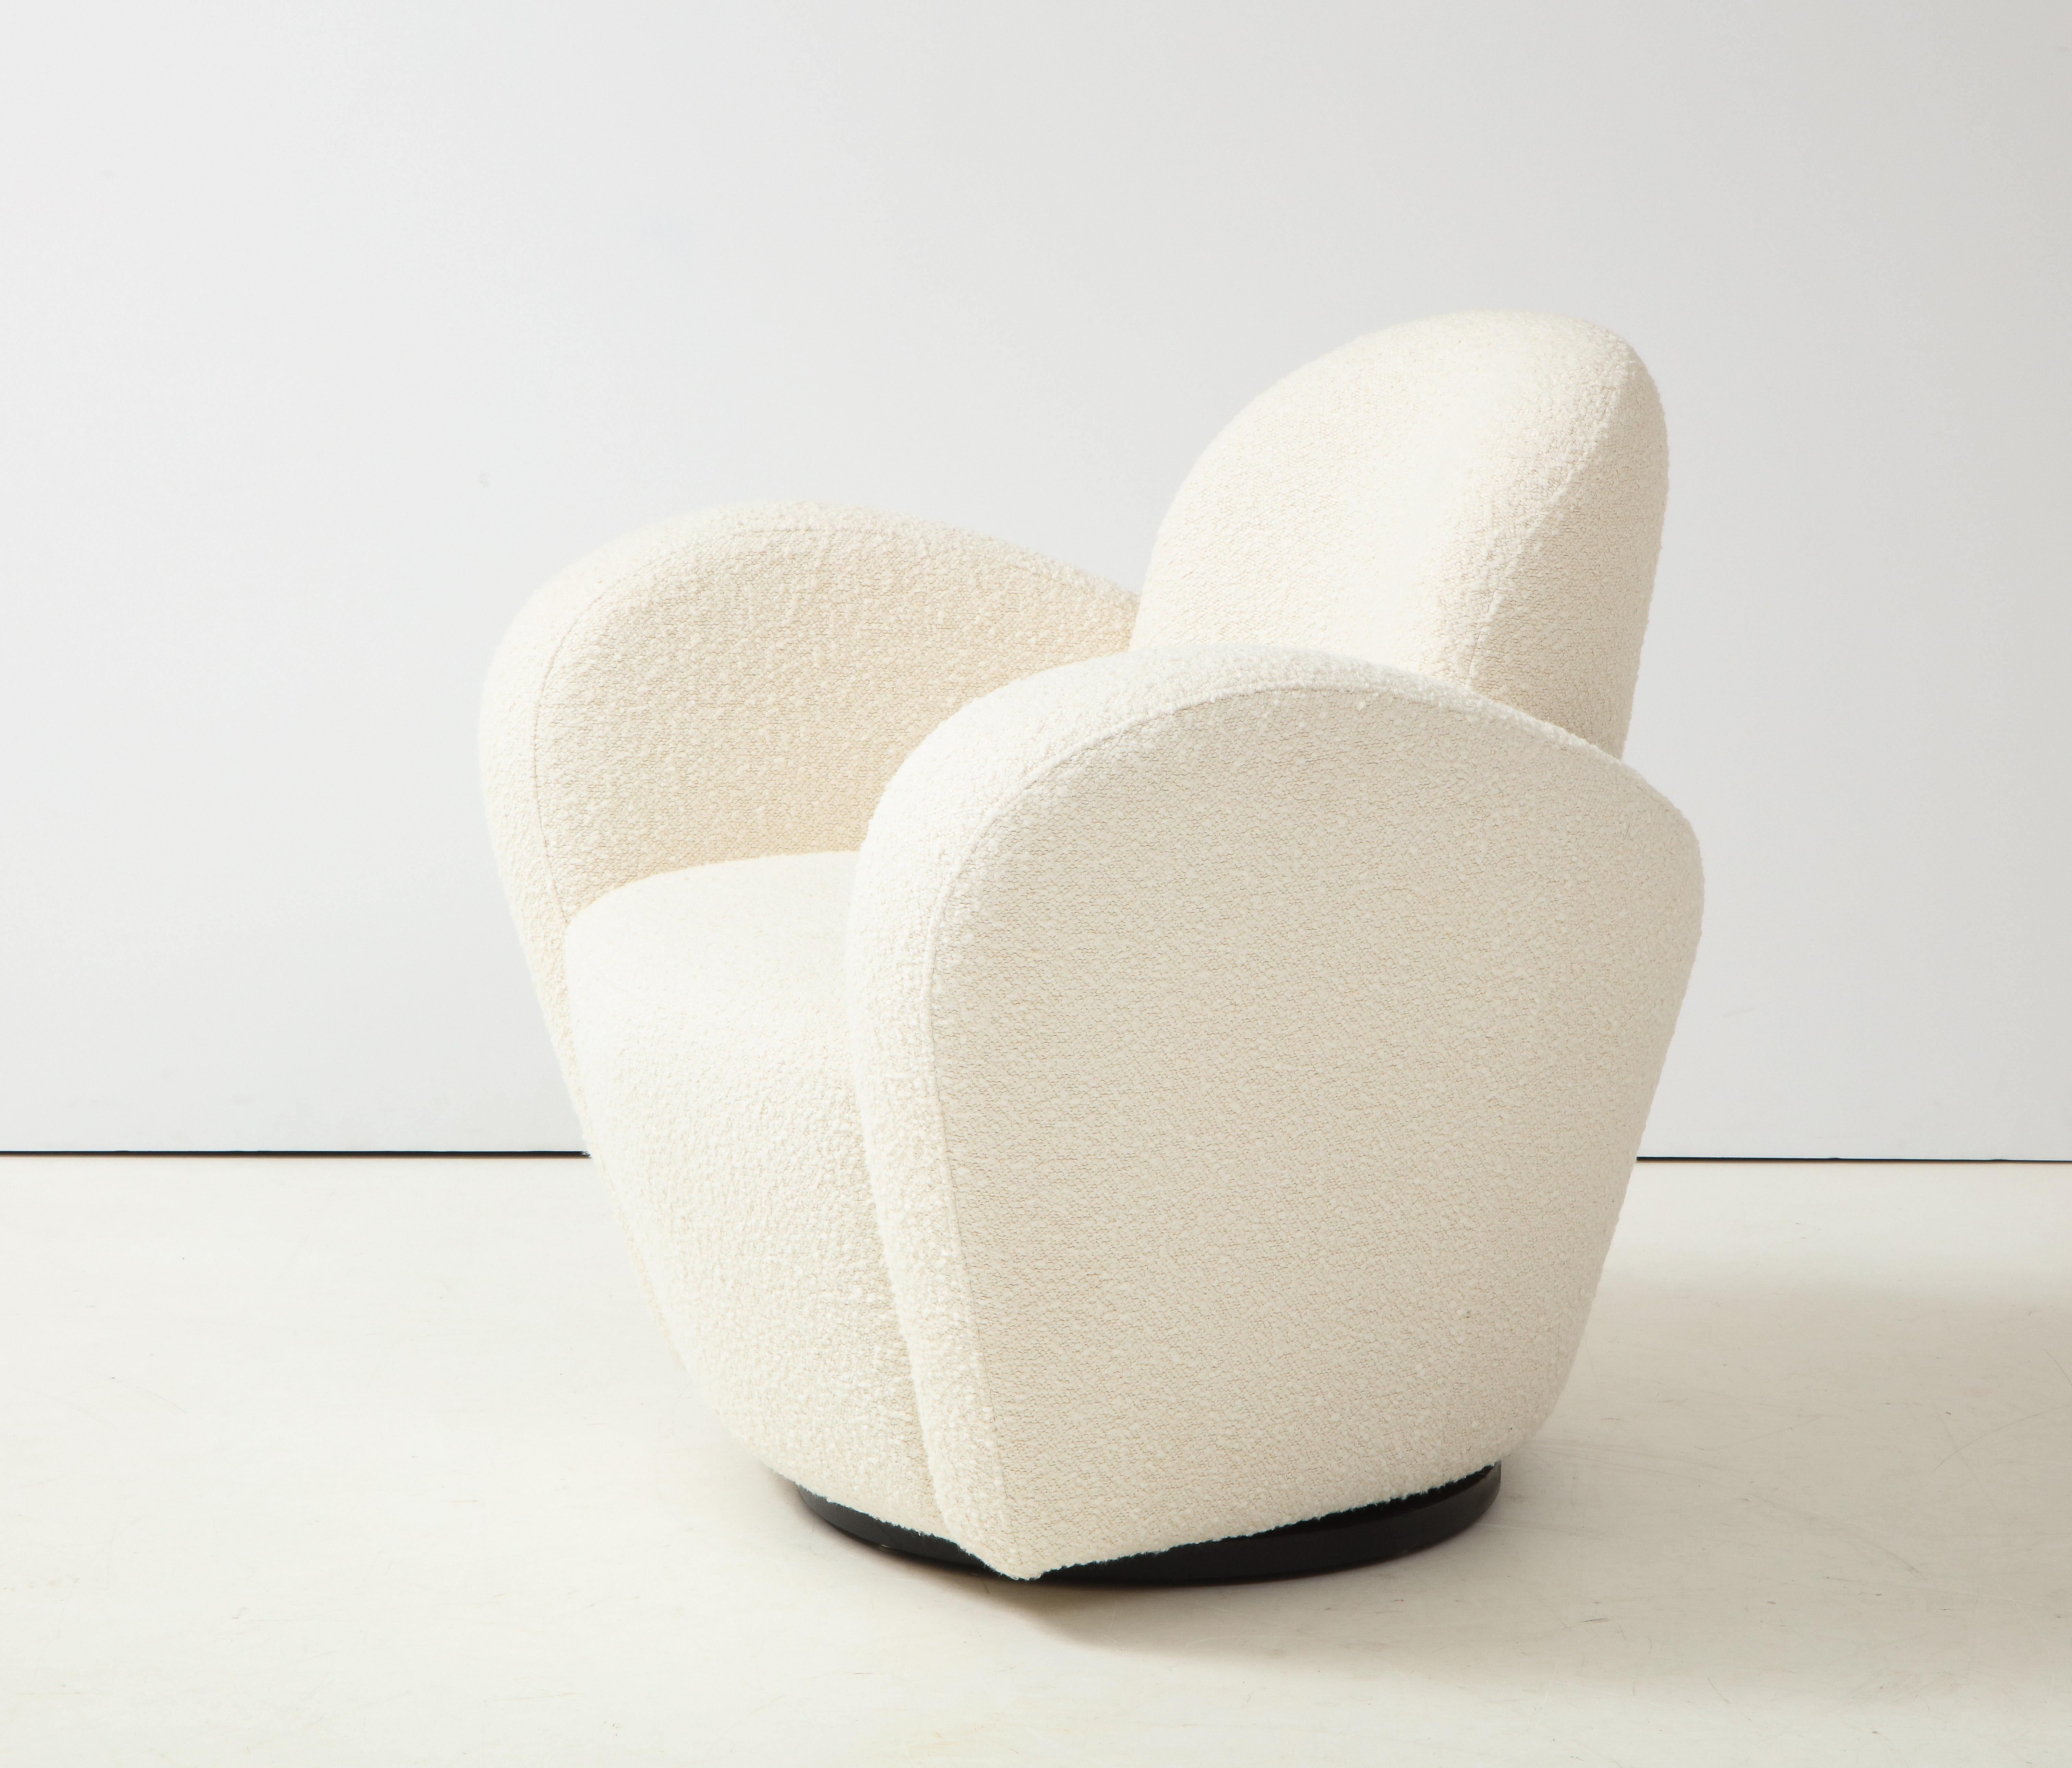 Michael Wolk swivel lounge chair fully restored and newly reupholstered in a luxurious Holland & Sherry Melissani White or ivory bouclé resting on a black wooden swivel base. This iconic and chic form consists of elegantly curved wraparound arms